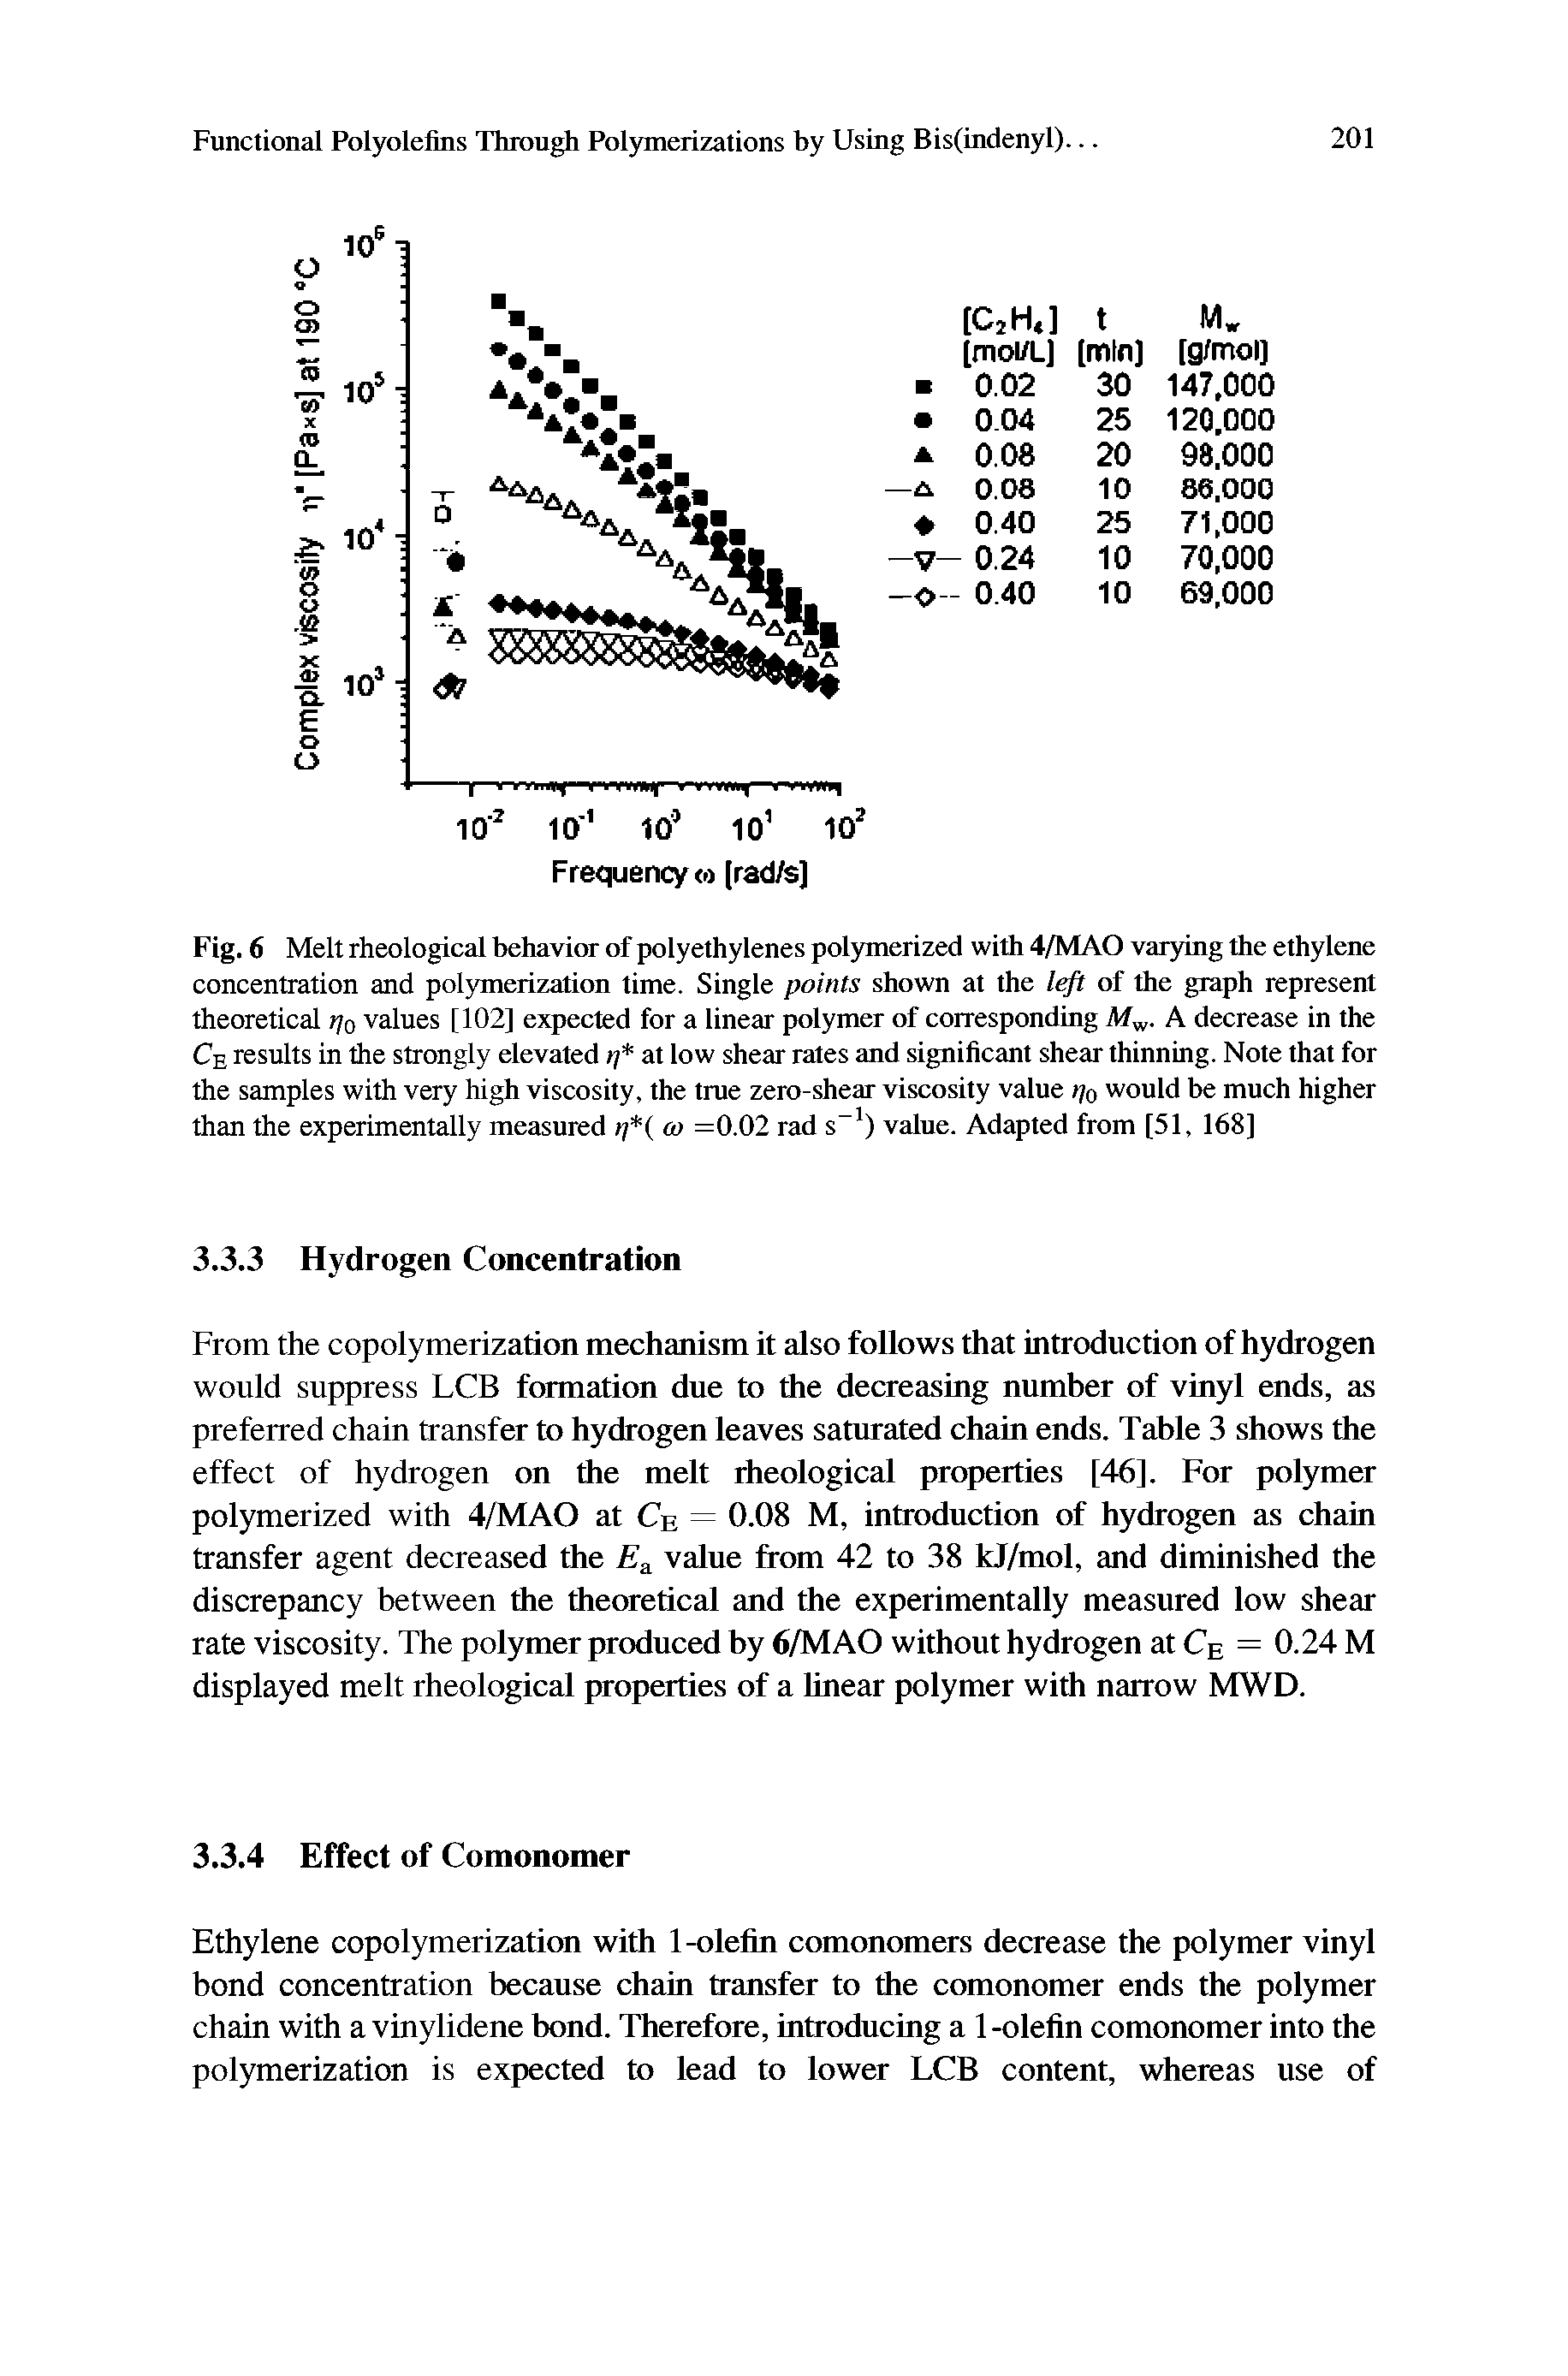 Fig. 6 Melt rheological behaviOT of polyethylenes polymerized with 4/MAO varying the ethylene concentration and polymerization time. Single points shown at the of the graph represent theoretical j/o values [102] expected for a linear polymer of corresponding M . A decrease in the Ce results in the strongly elevated p at low shear rates and significant shear thinning. Note that for the samples with very high viscosity, the true zero-shear viscosity value >/o would be much higher than the experimentally measured >/ ( <o =0.02 rad s ) value. Adapted from [51, 168]...